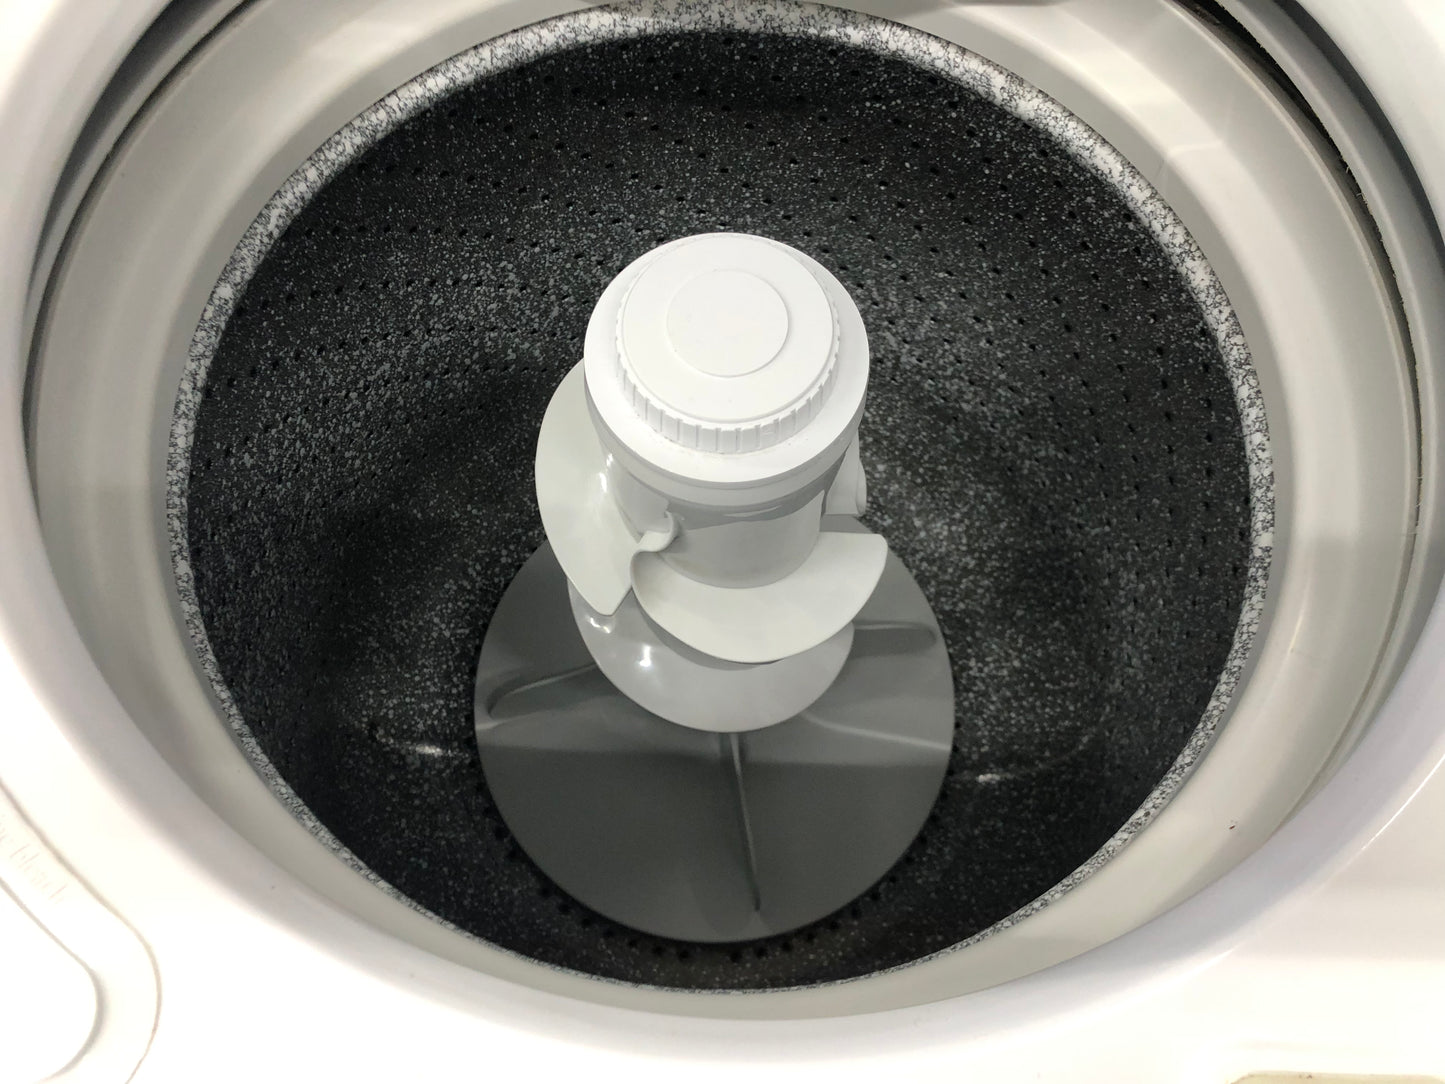 Admiral 3.4 cu ft Top Load Washer